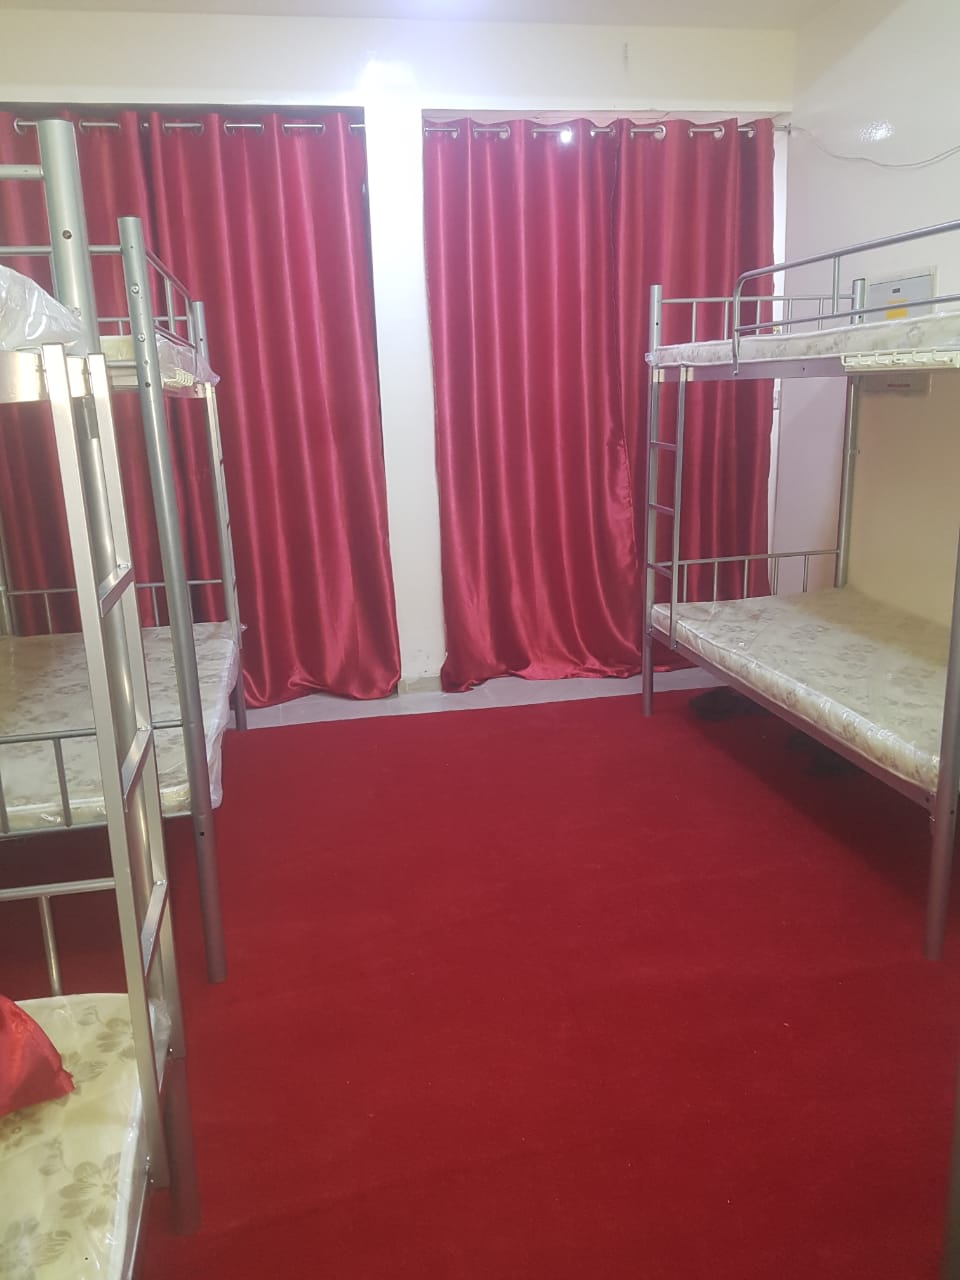 BED SPACE FOR LADIES / GENTS FROM AED 650 ONWARDS NEAR UNION/BANI